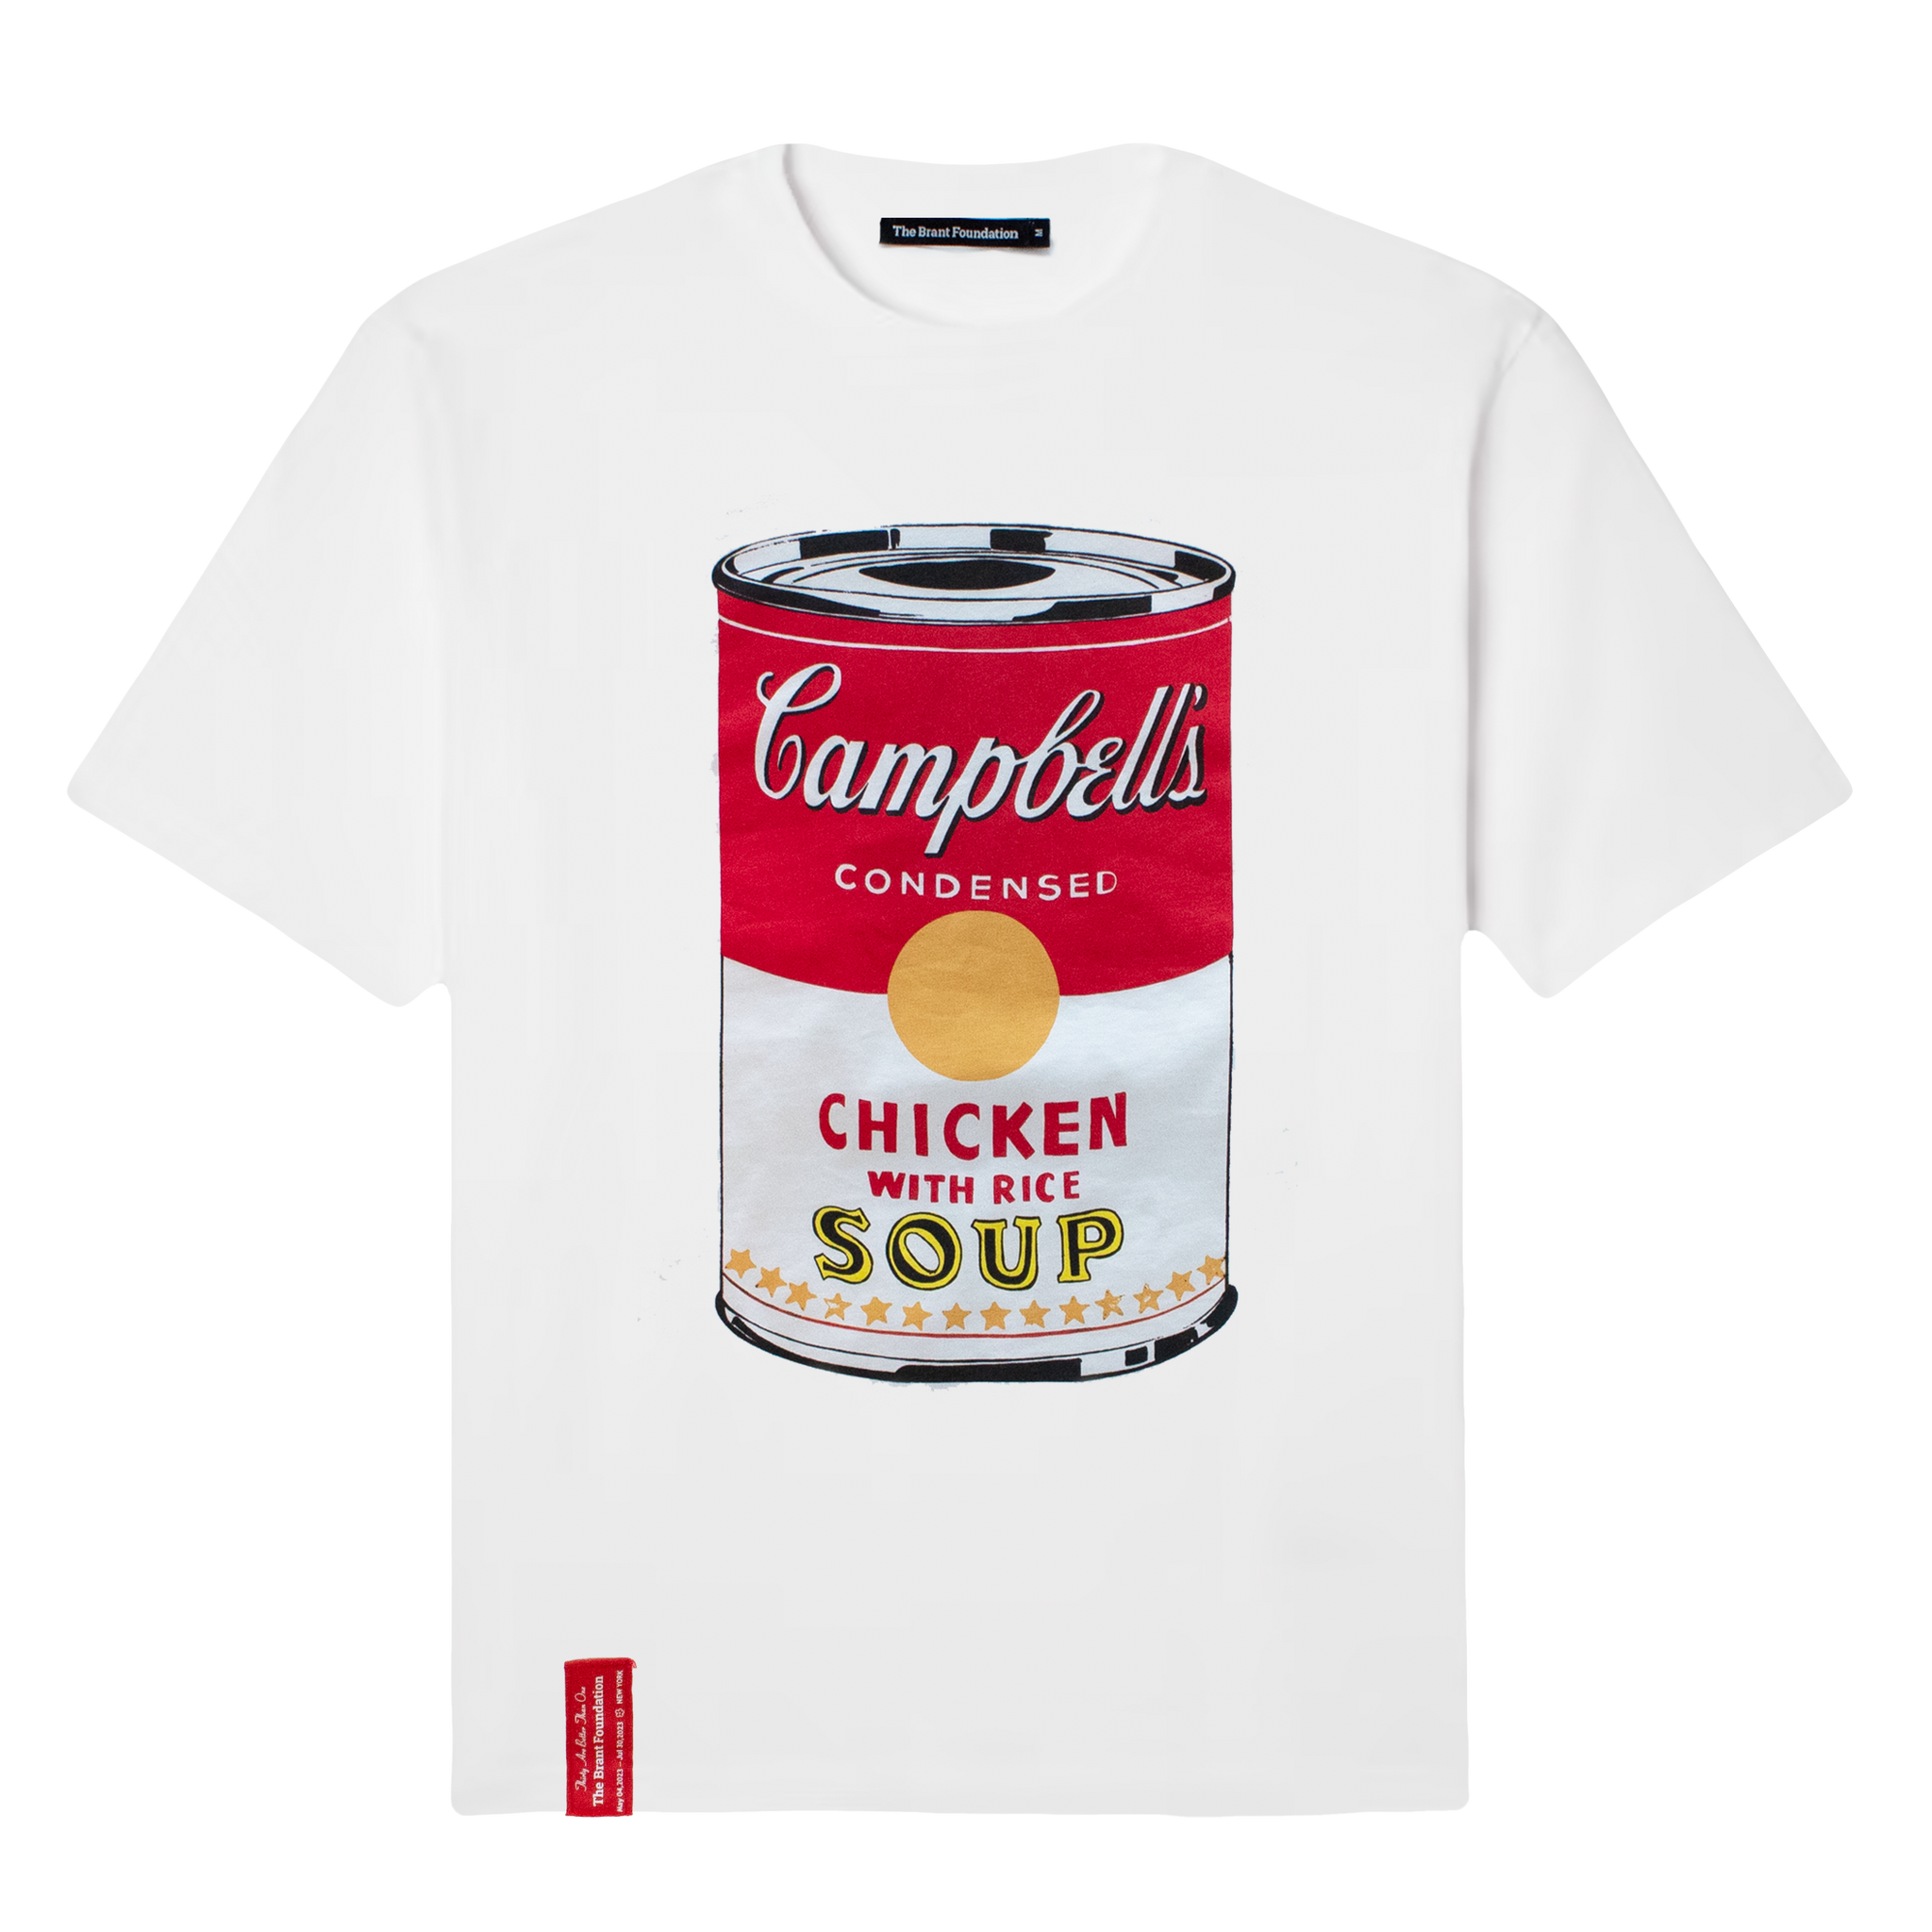 Andy Warhol "Campbell's Soup Can" White T-Shirt